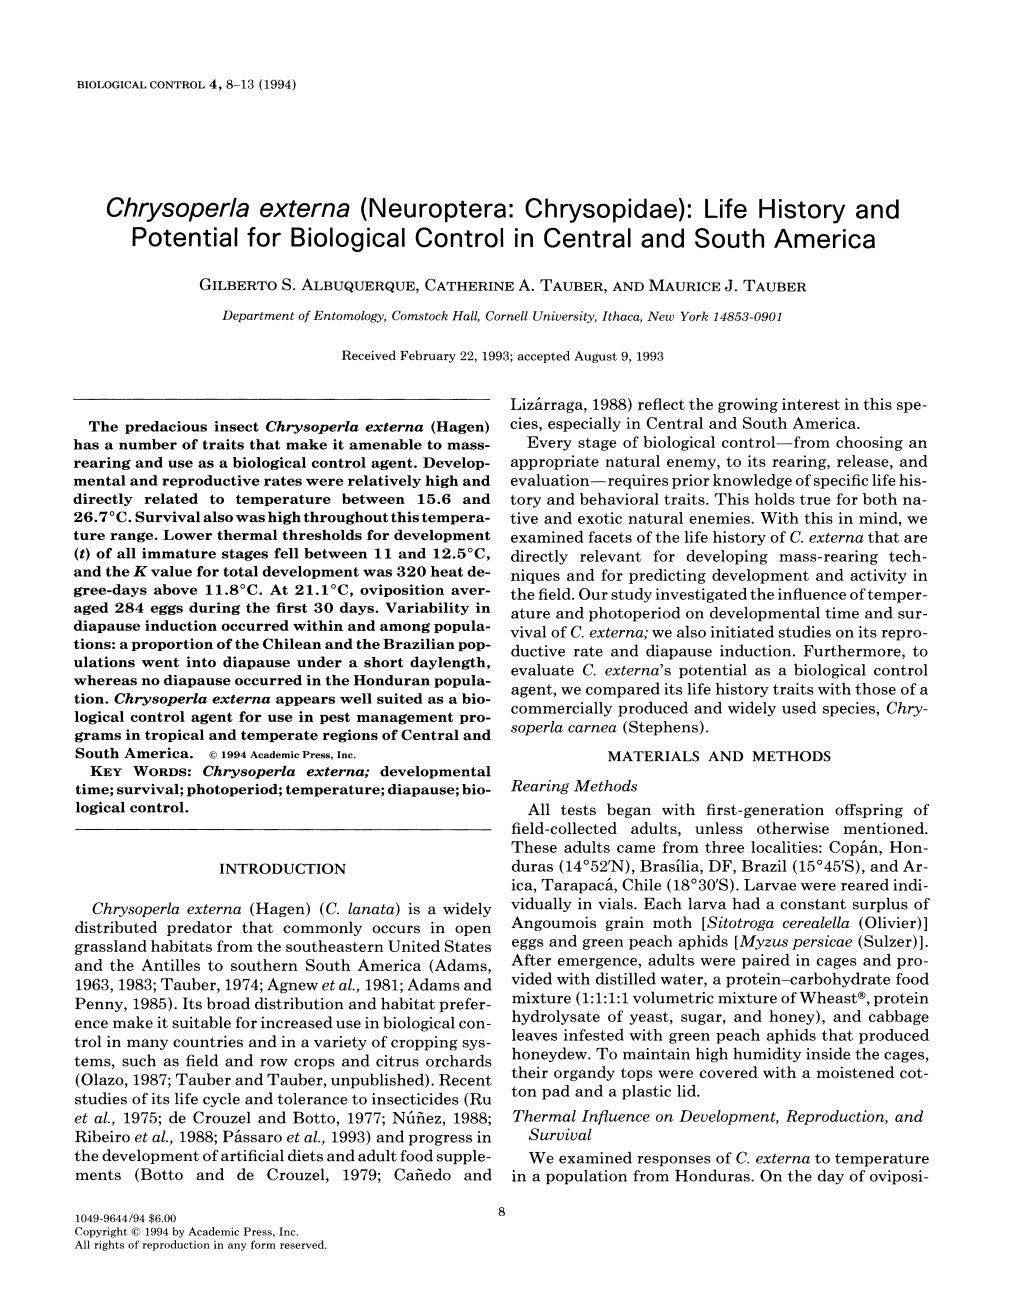 Chrysoperla Extern a (Neuroptera: Chrysopidae): Life History and Potential for Biological Control in Central and South America